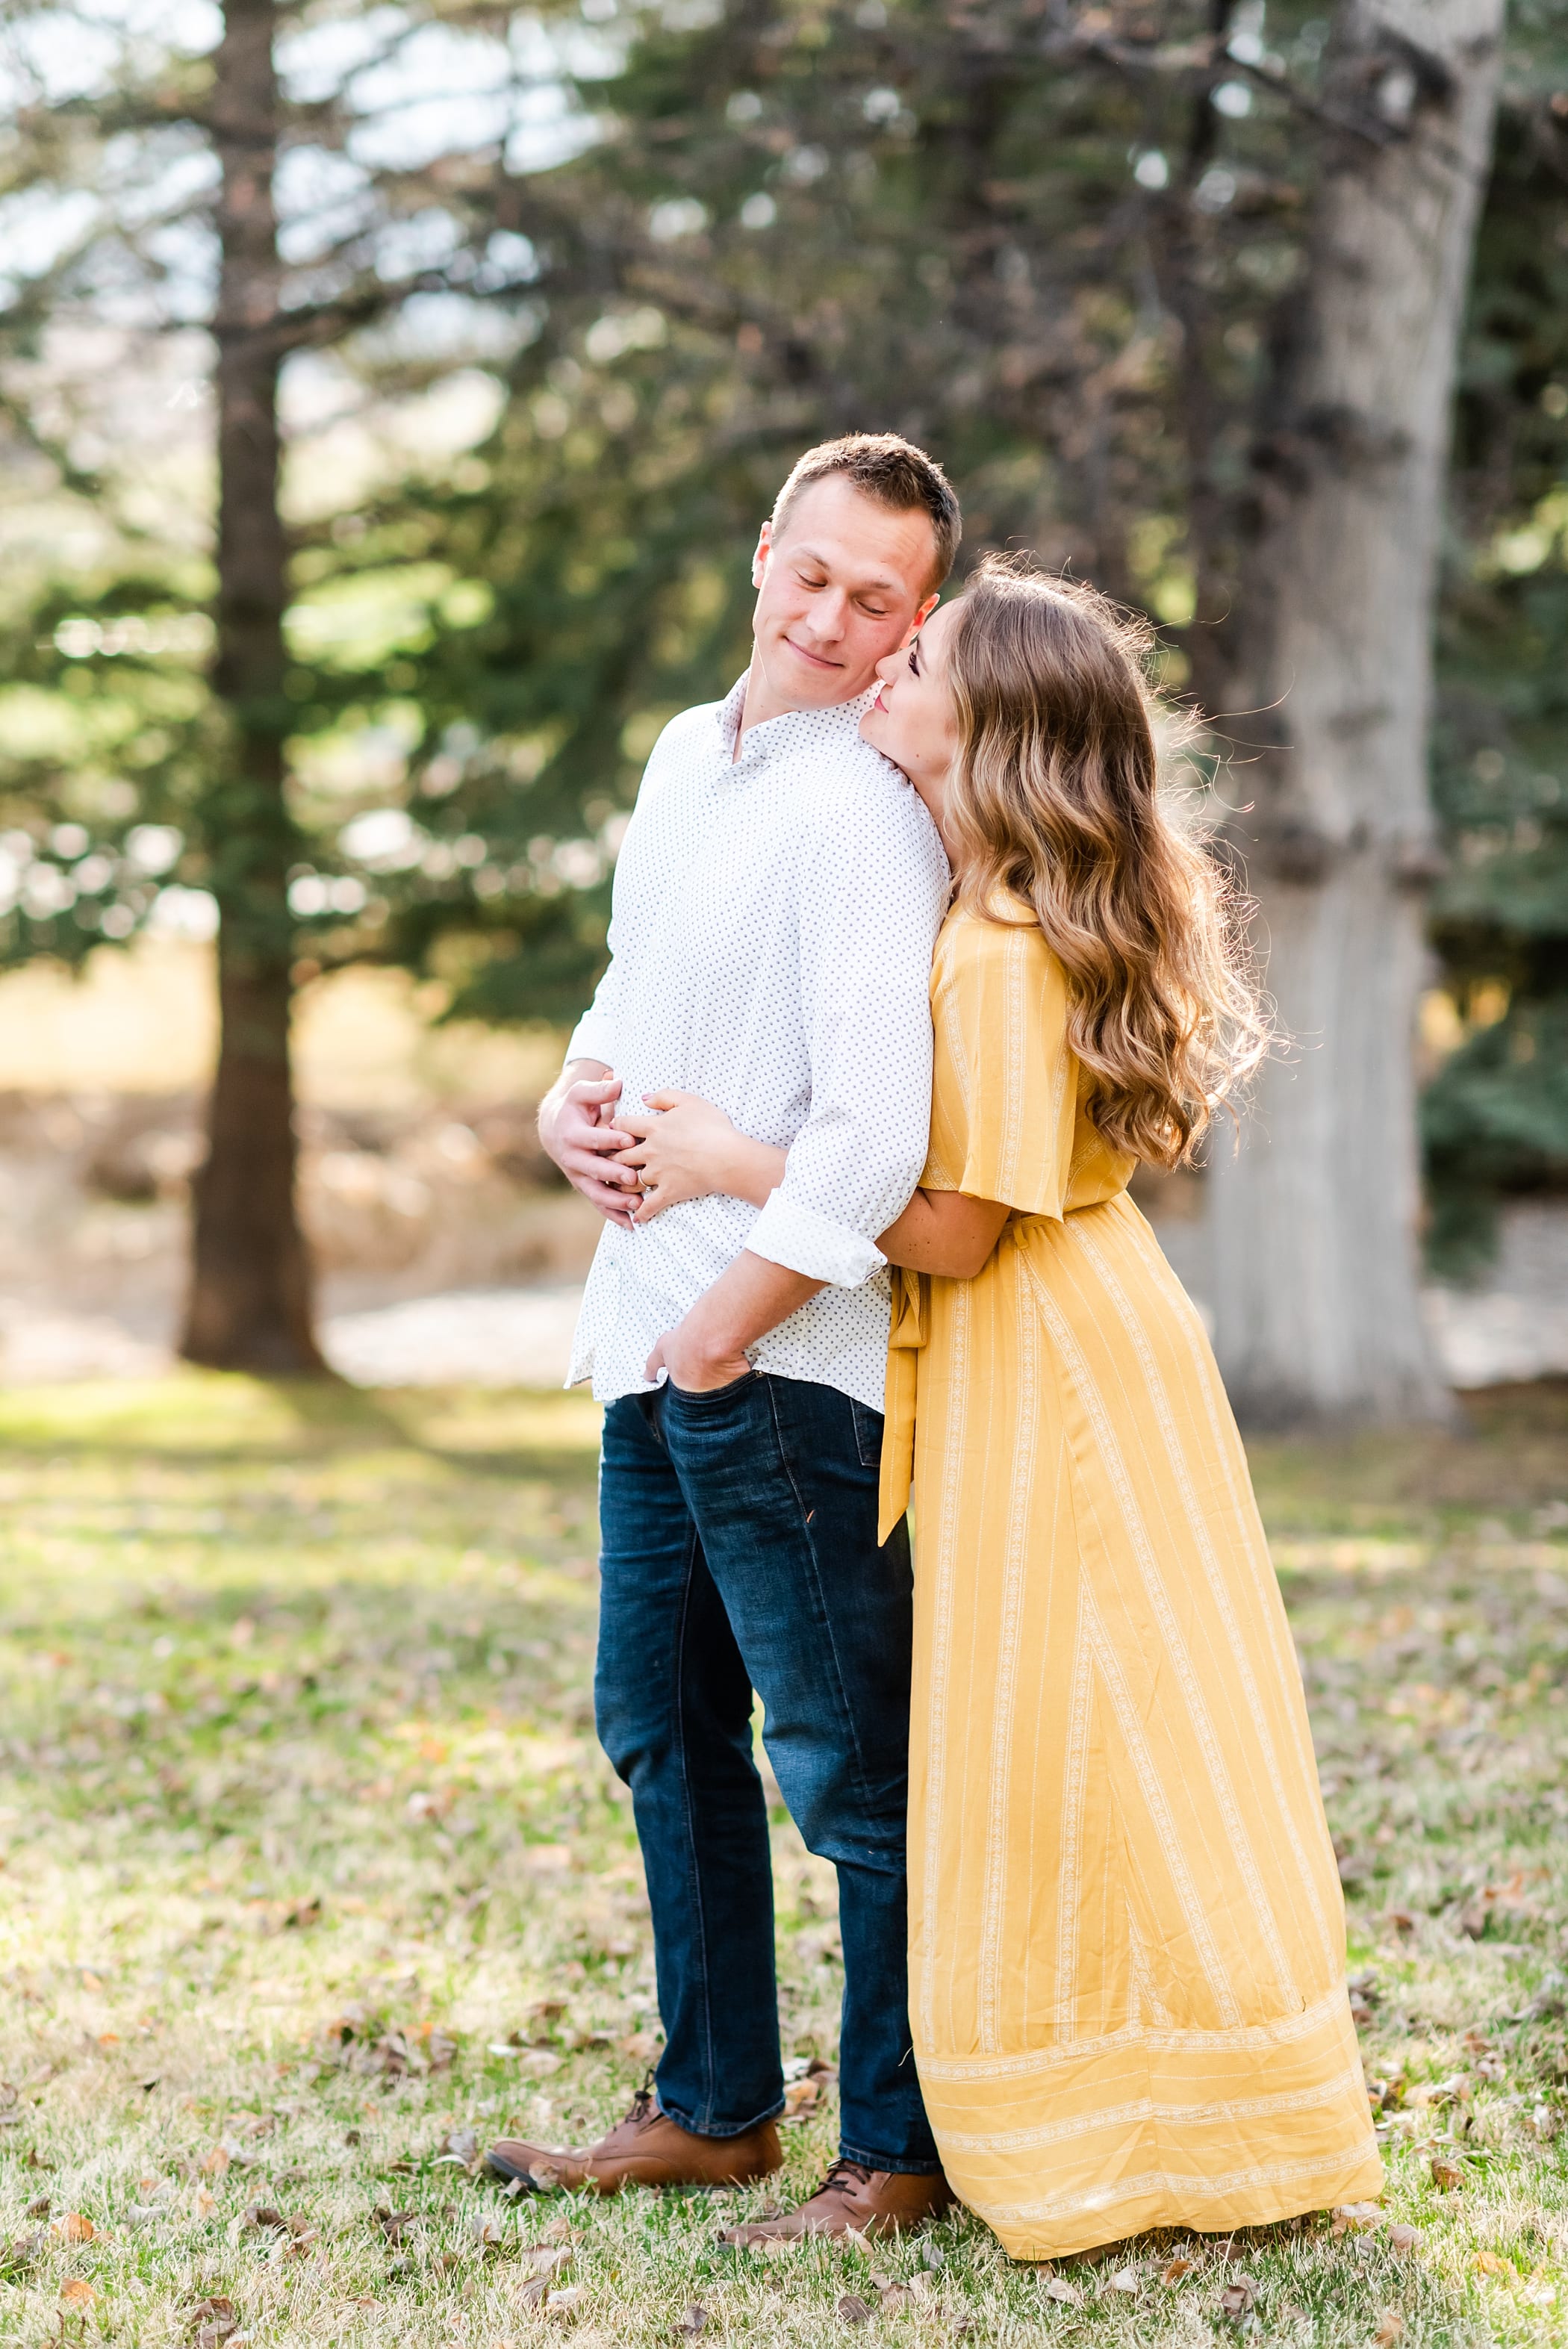 what to wear for spring engagement photos: yellow dress and white button up